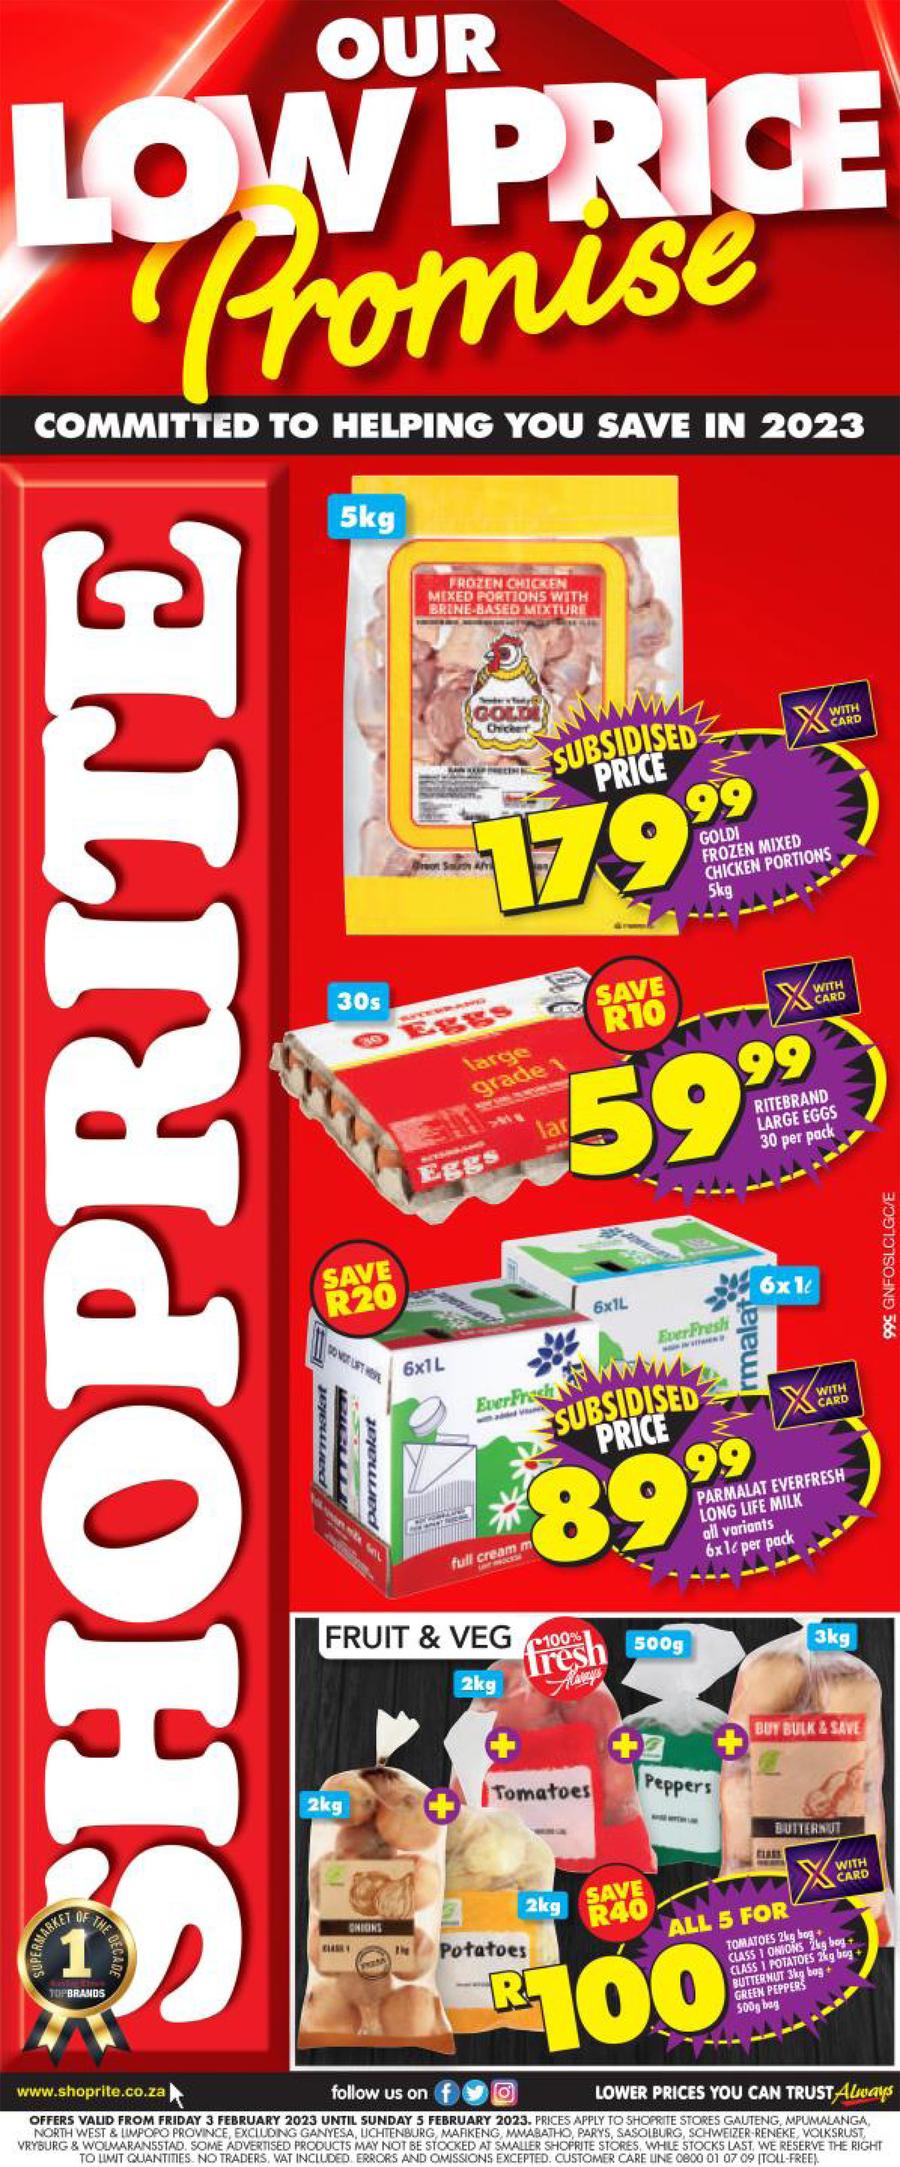 Shoprite Gauteng, Mpumalanga, North West & Limpopo Our Low Price